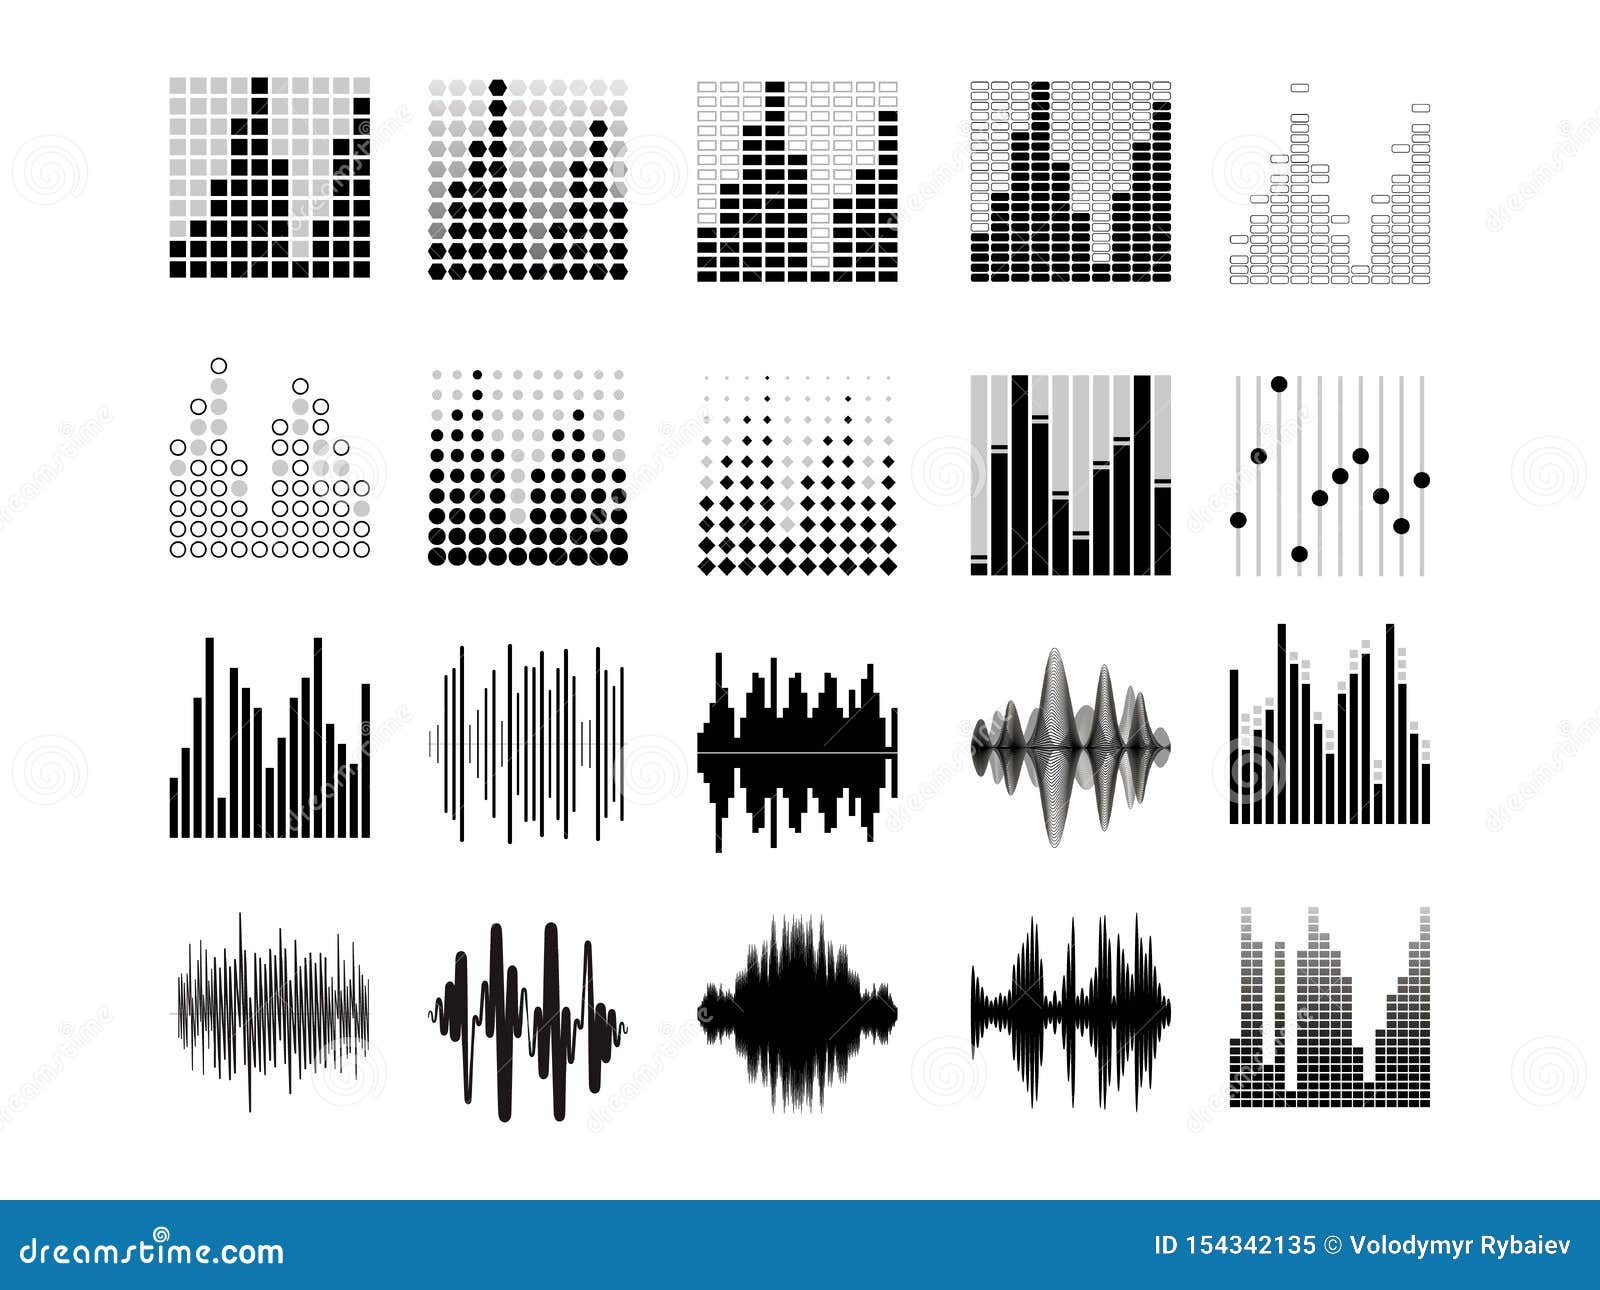 83,411 Audio Frequency Images, Stock Photos, 3D objects, & Vectors